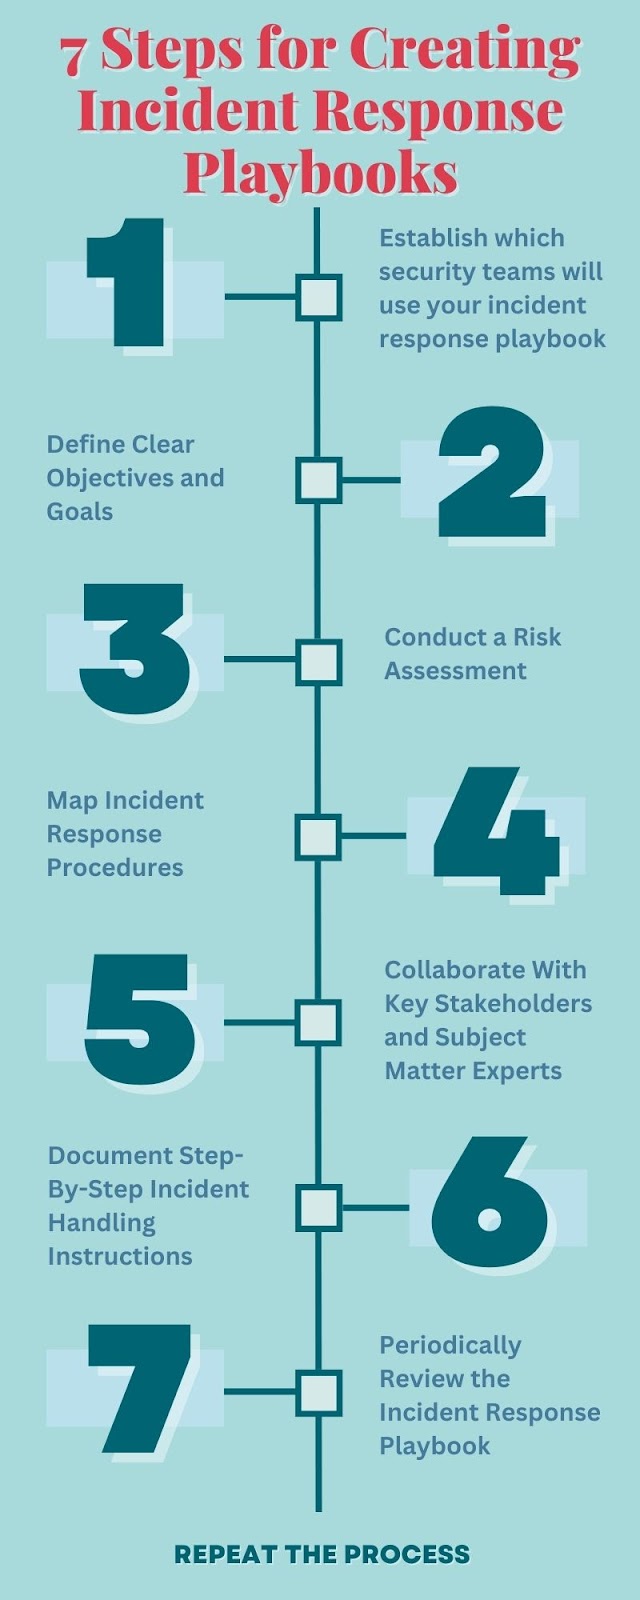 7 Steps for Creating Incident Response Playbooks